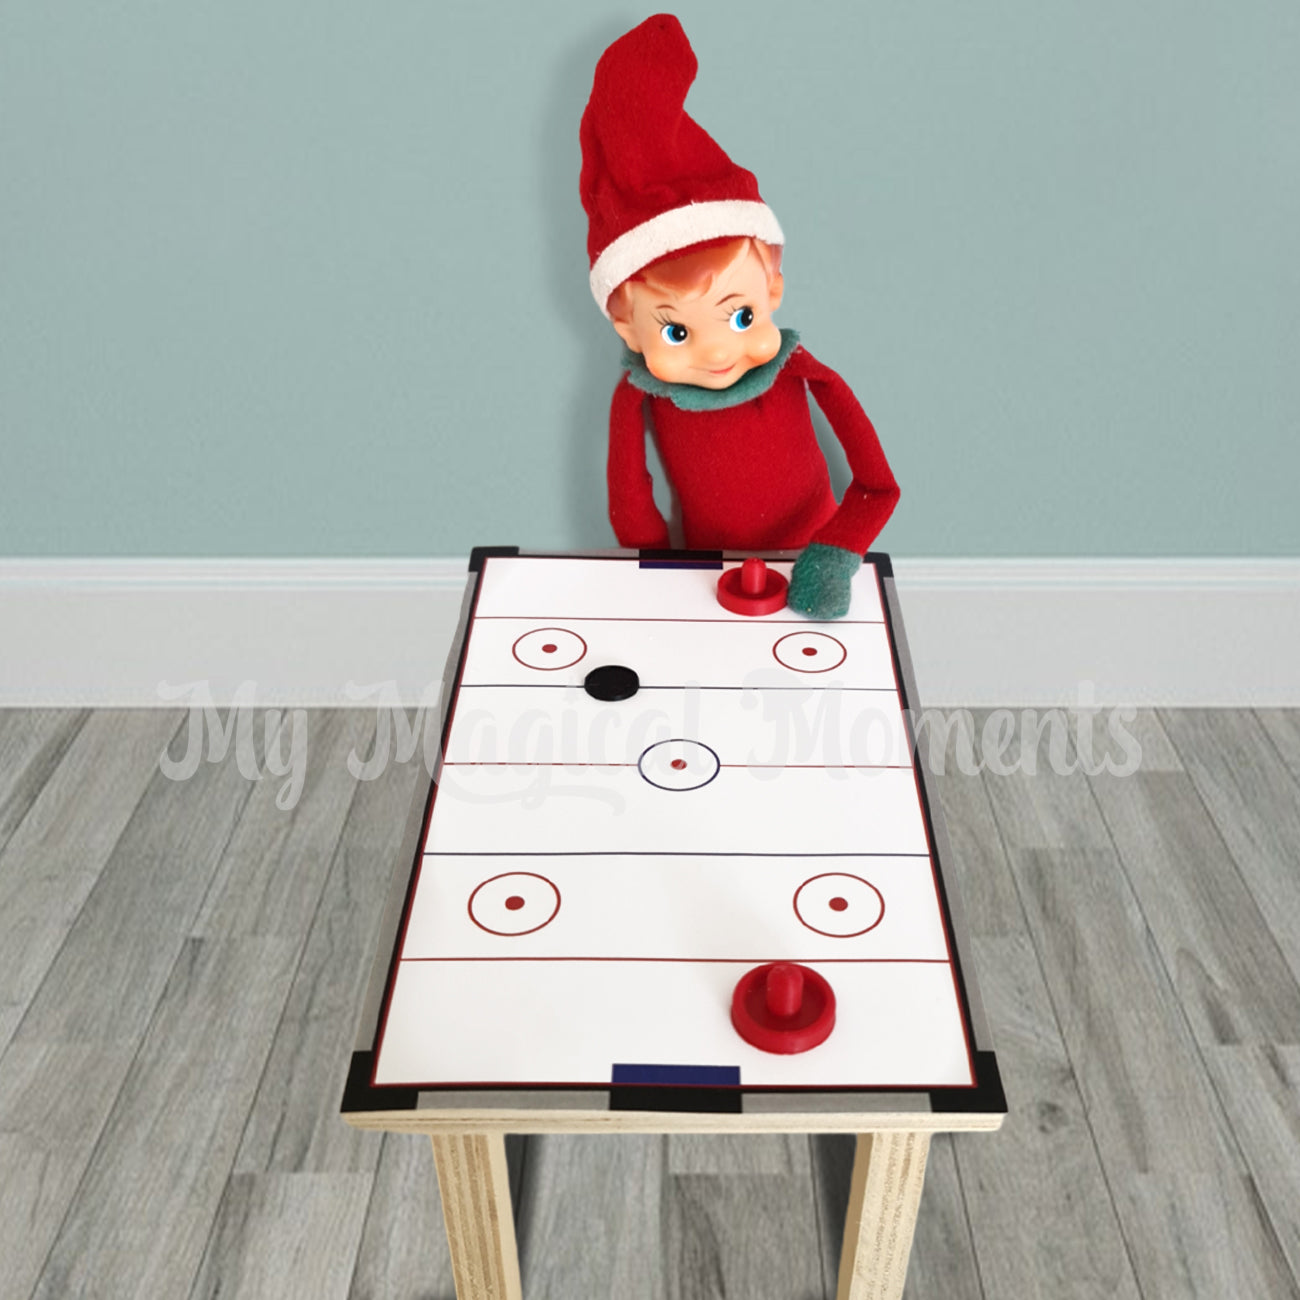 Elf playing air hockey on a table